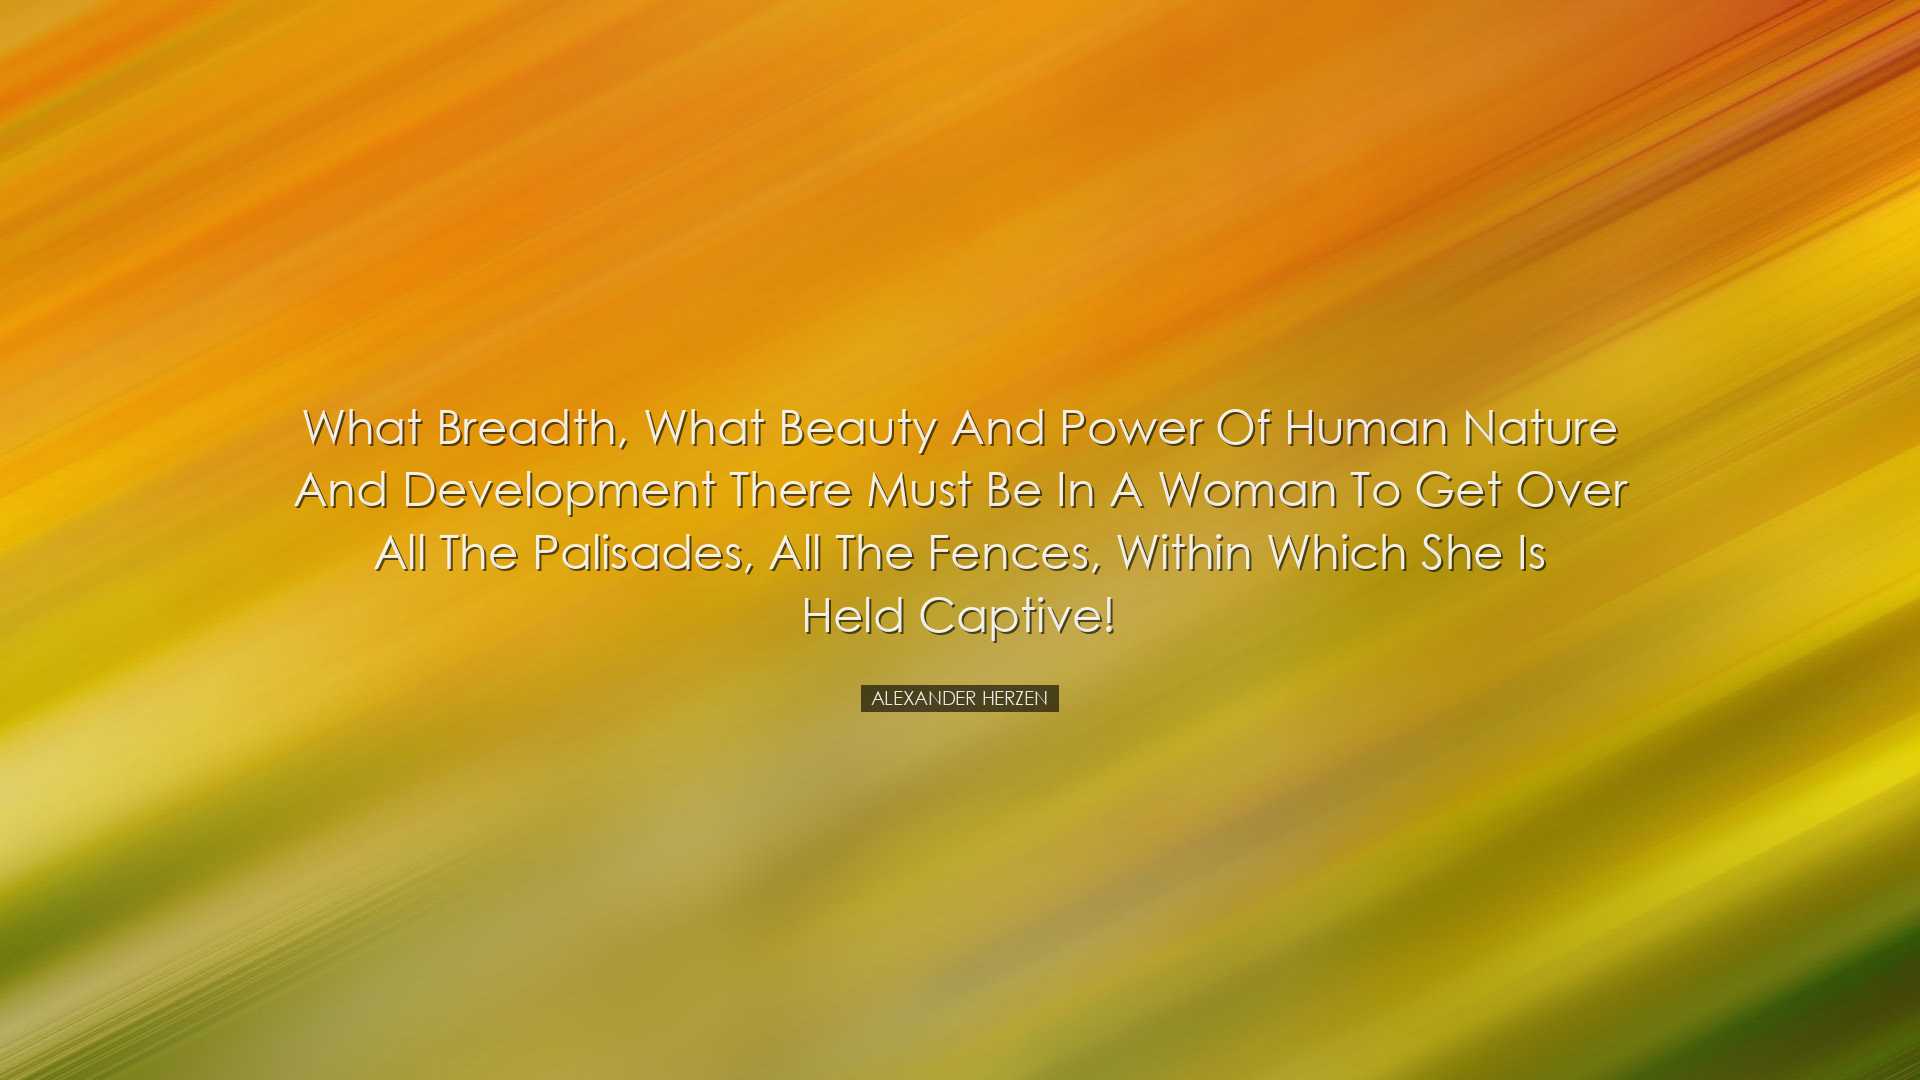 What breadth, what beauty and power of human nature and developmen